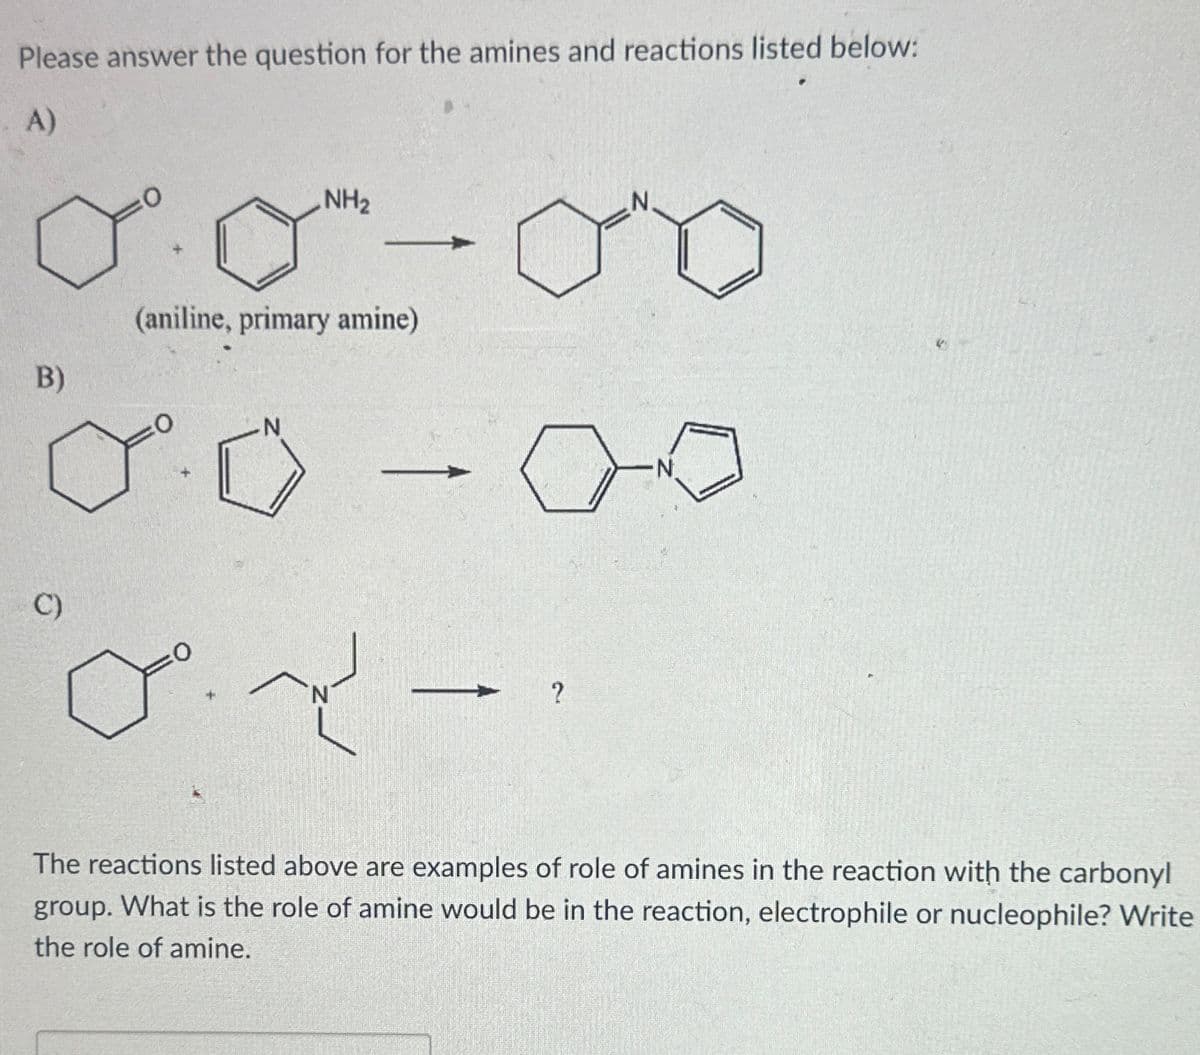 Please answer the question for the amines and reactions listed below:
A)
00-00
B)
(aniline, primary amine)
0.0
C)
о
یم میں
?
The reactions listed above are examples of role of amines in the reaction with the carbonyl
group. What is the role of amine would be in the reaction, electrophile or nucleophile? Write
the role of amine.